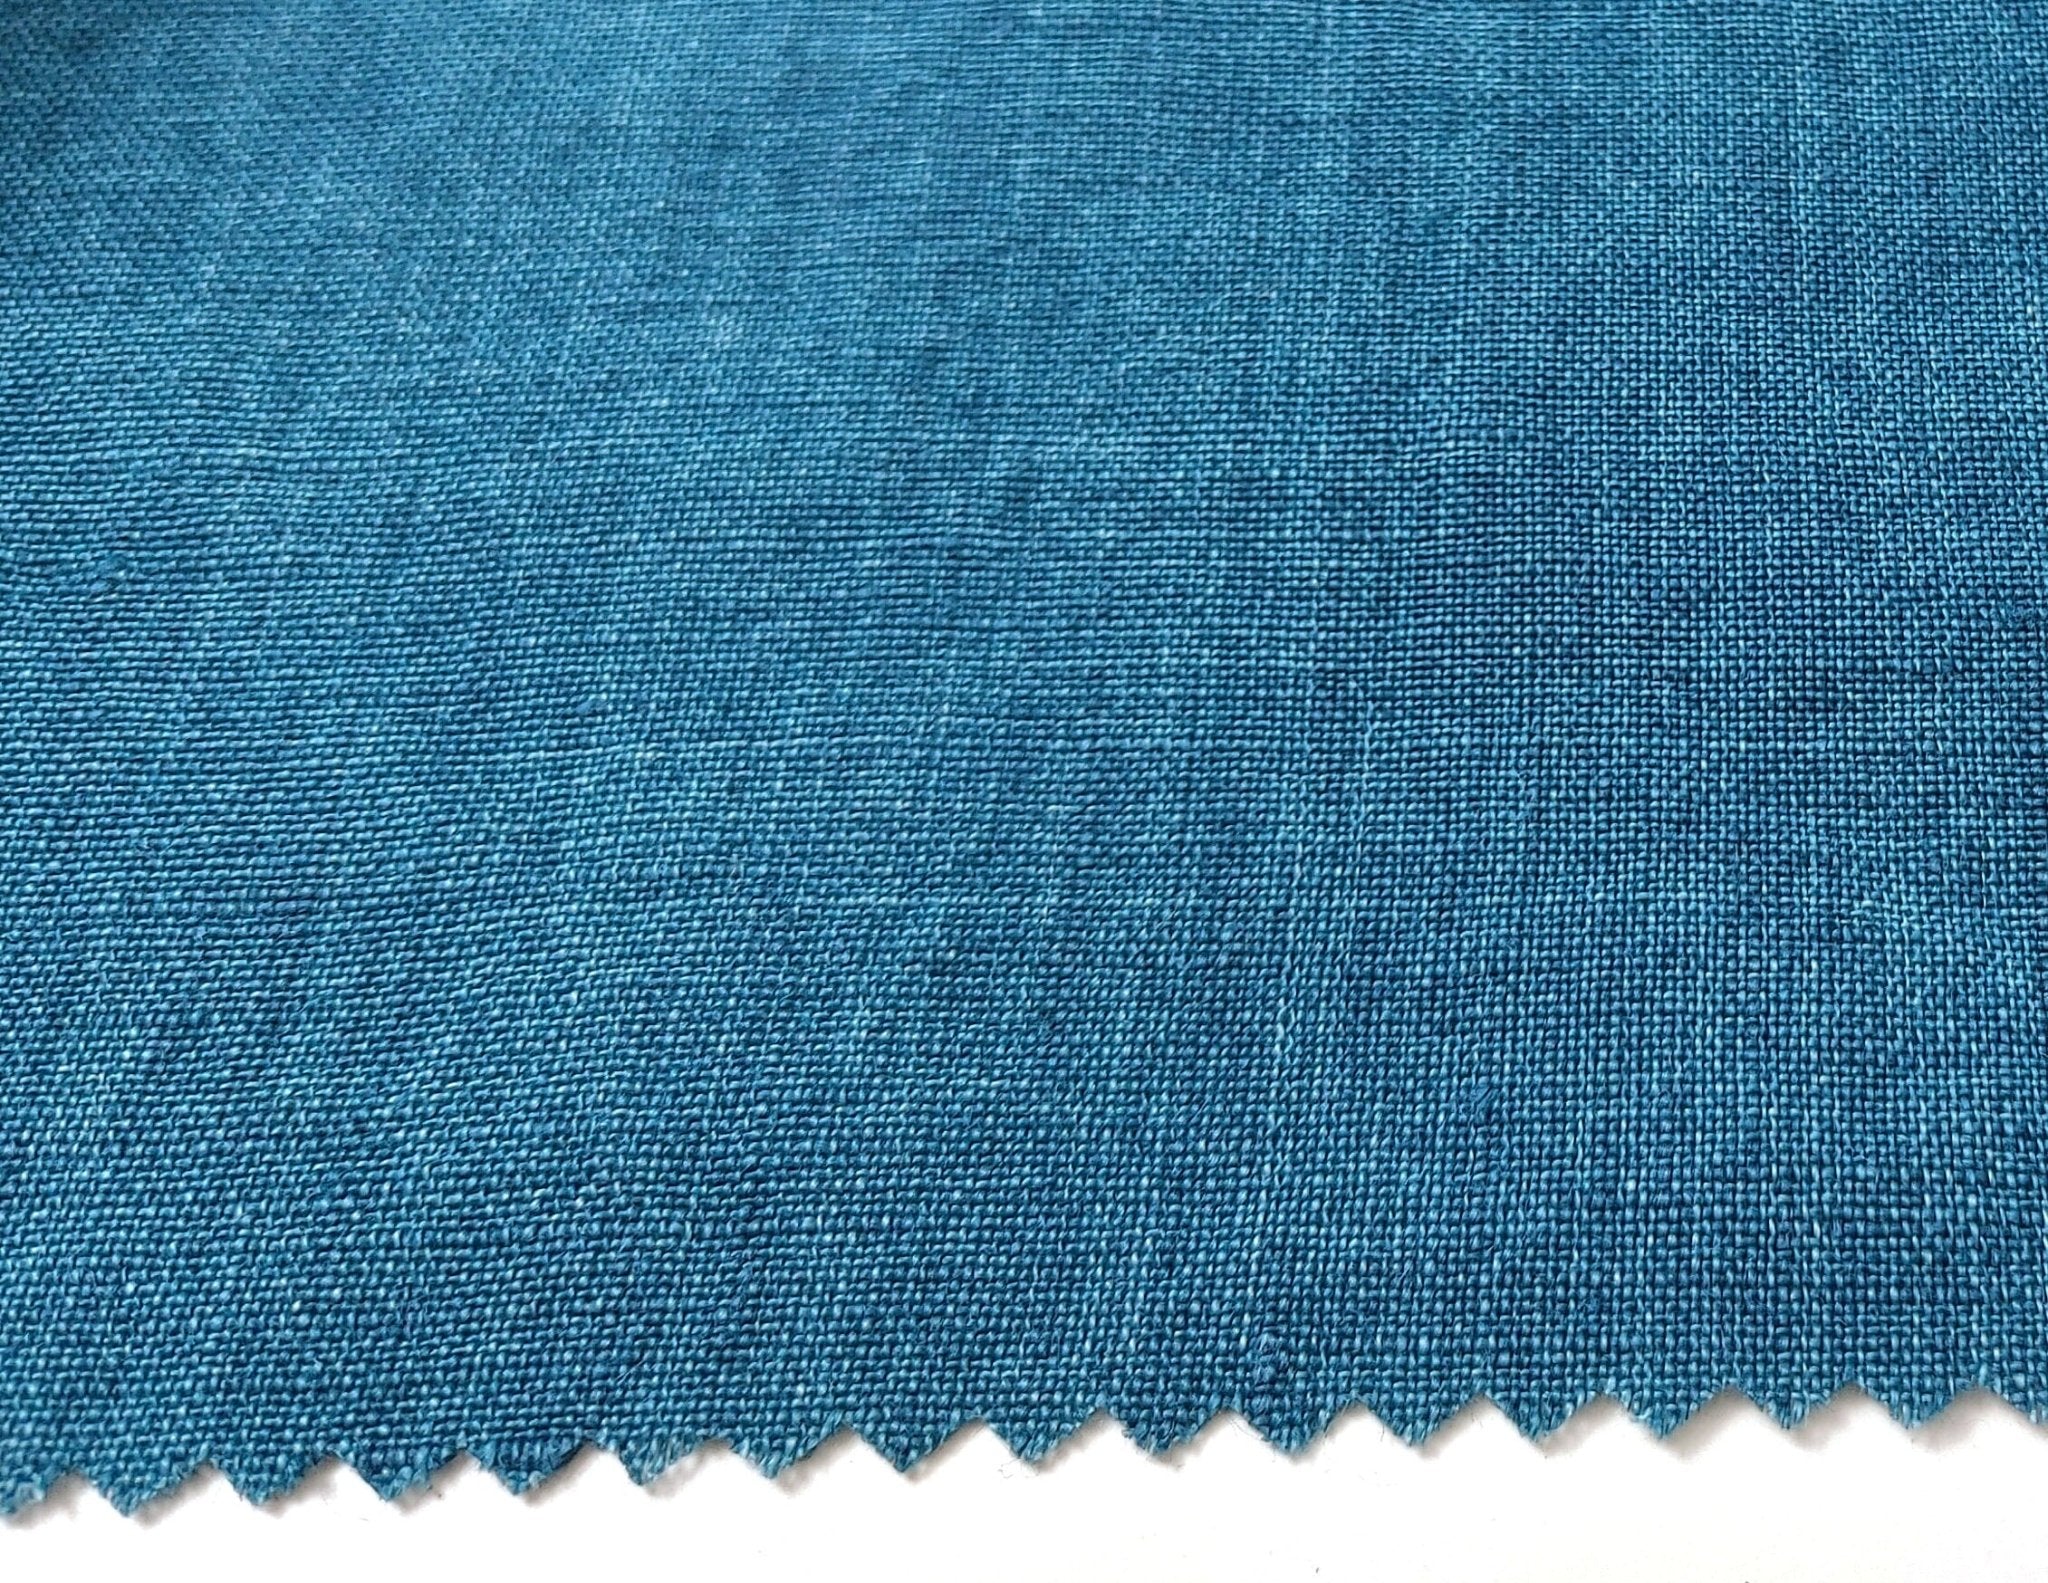 100% Linen Fabric: Delave High-Twisted Linen 14s, Medium Weight, New for 2024, 7712 7713 7682 - The Linen Lab - Greenish Blue